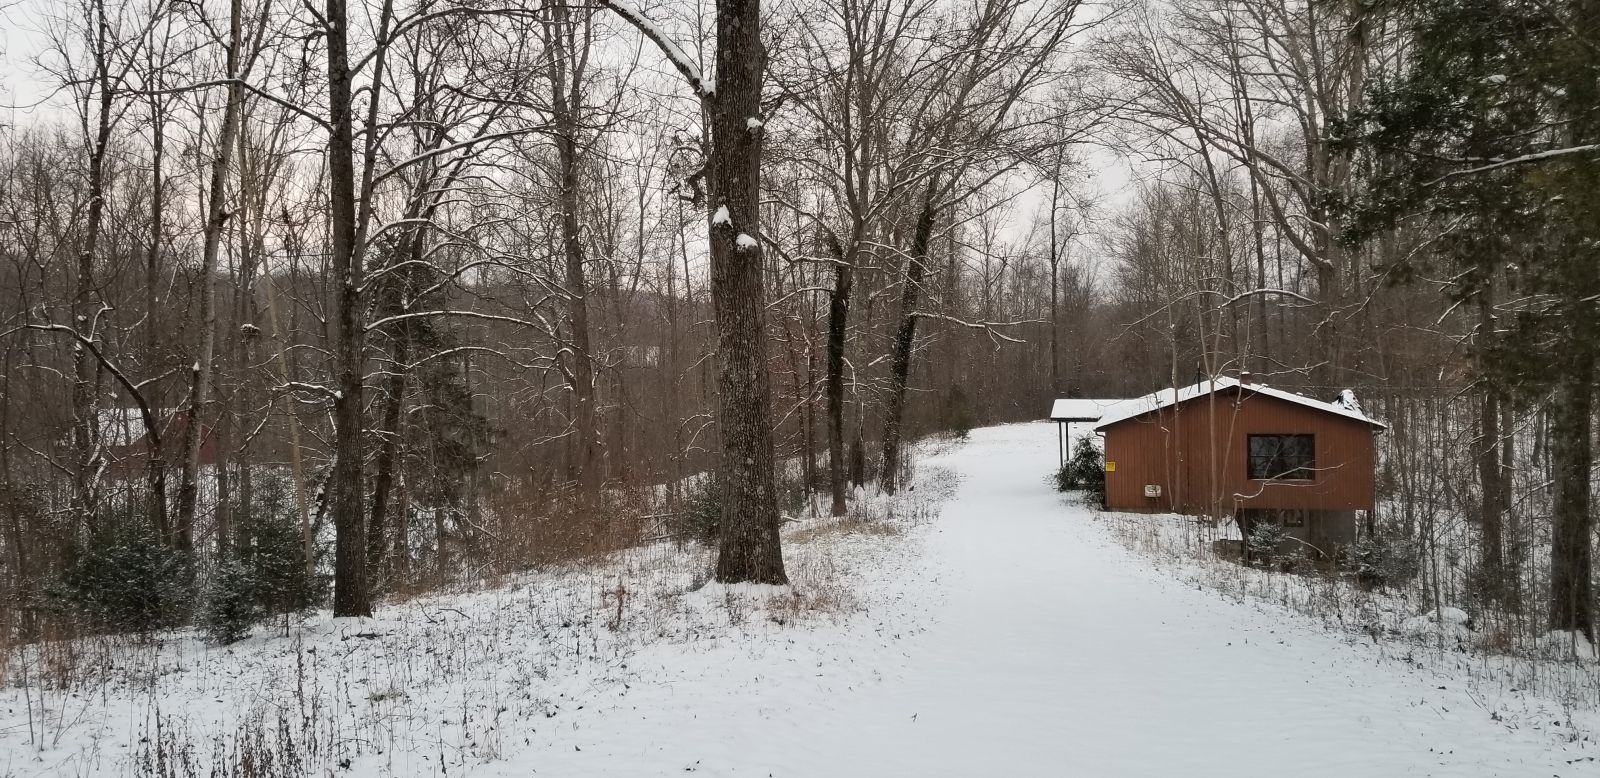 20180116_164714 - Mobile and barn with fallen trees in snow.jpg